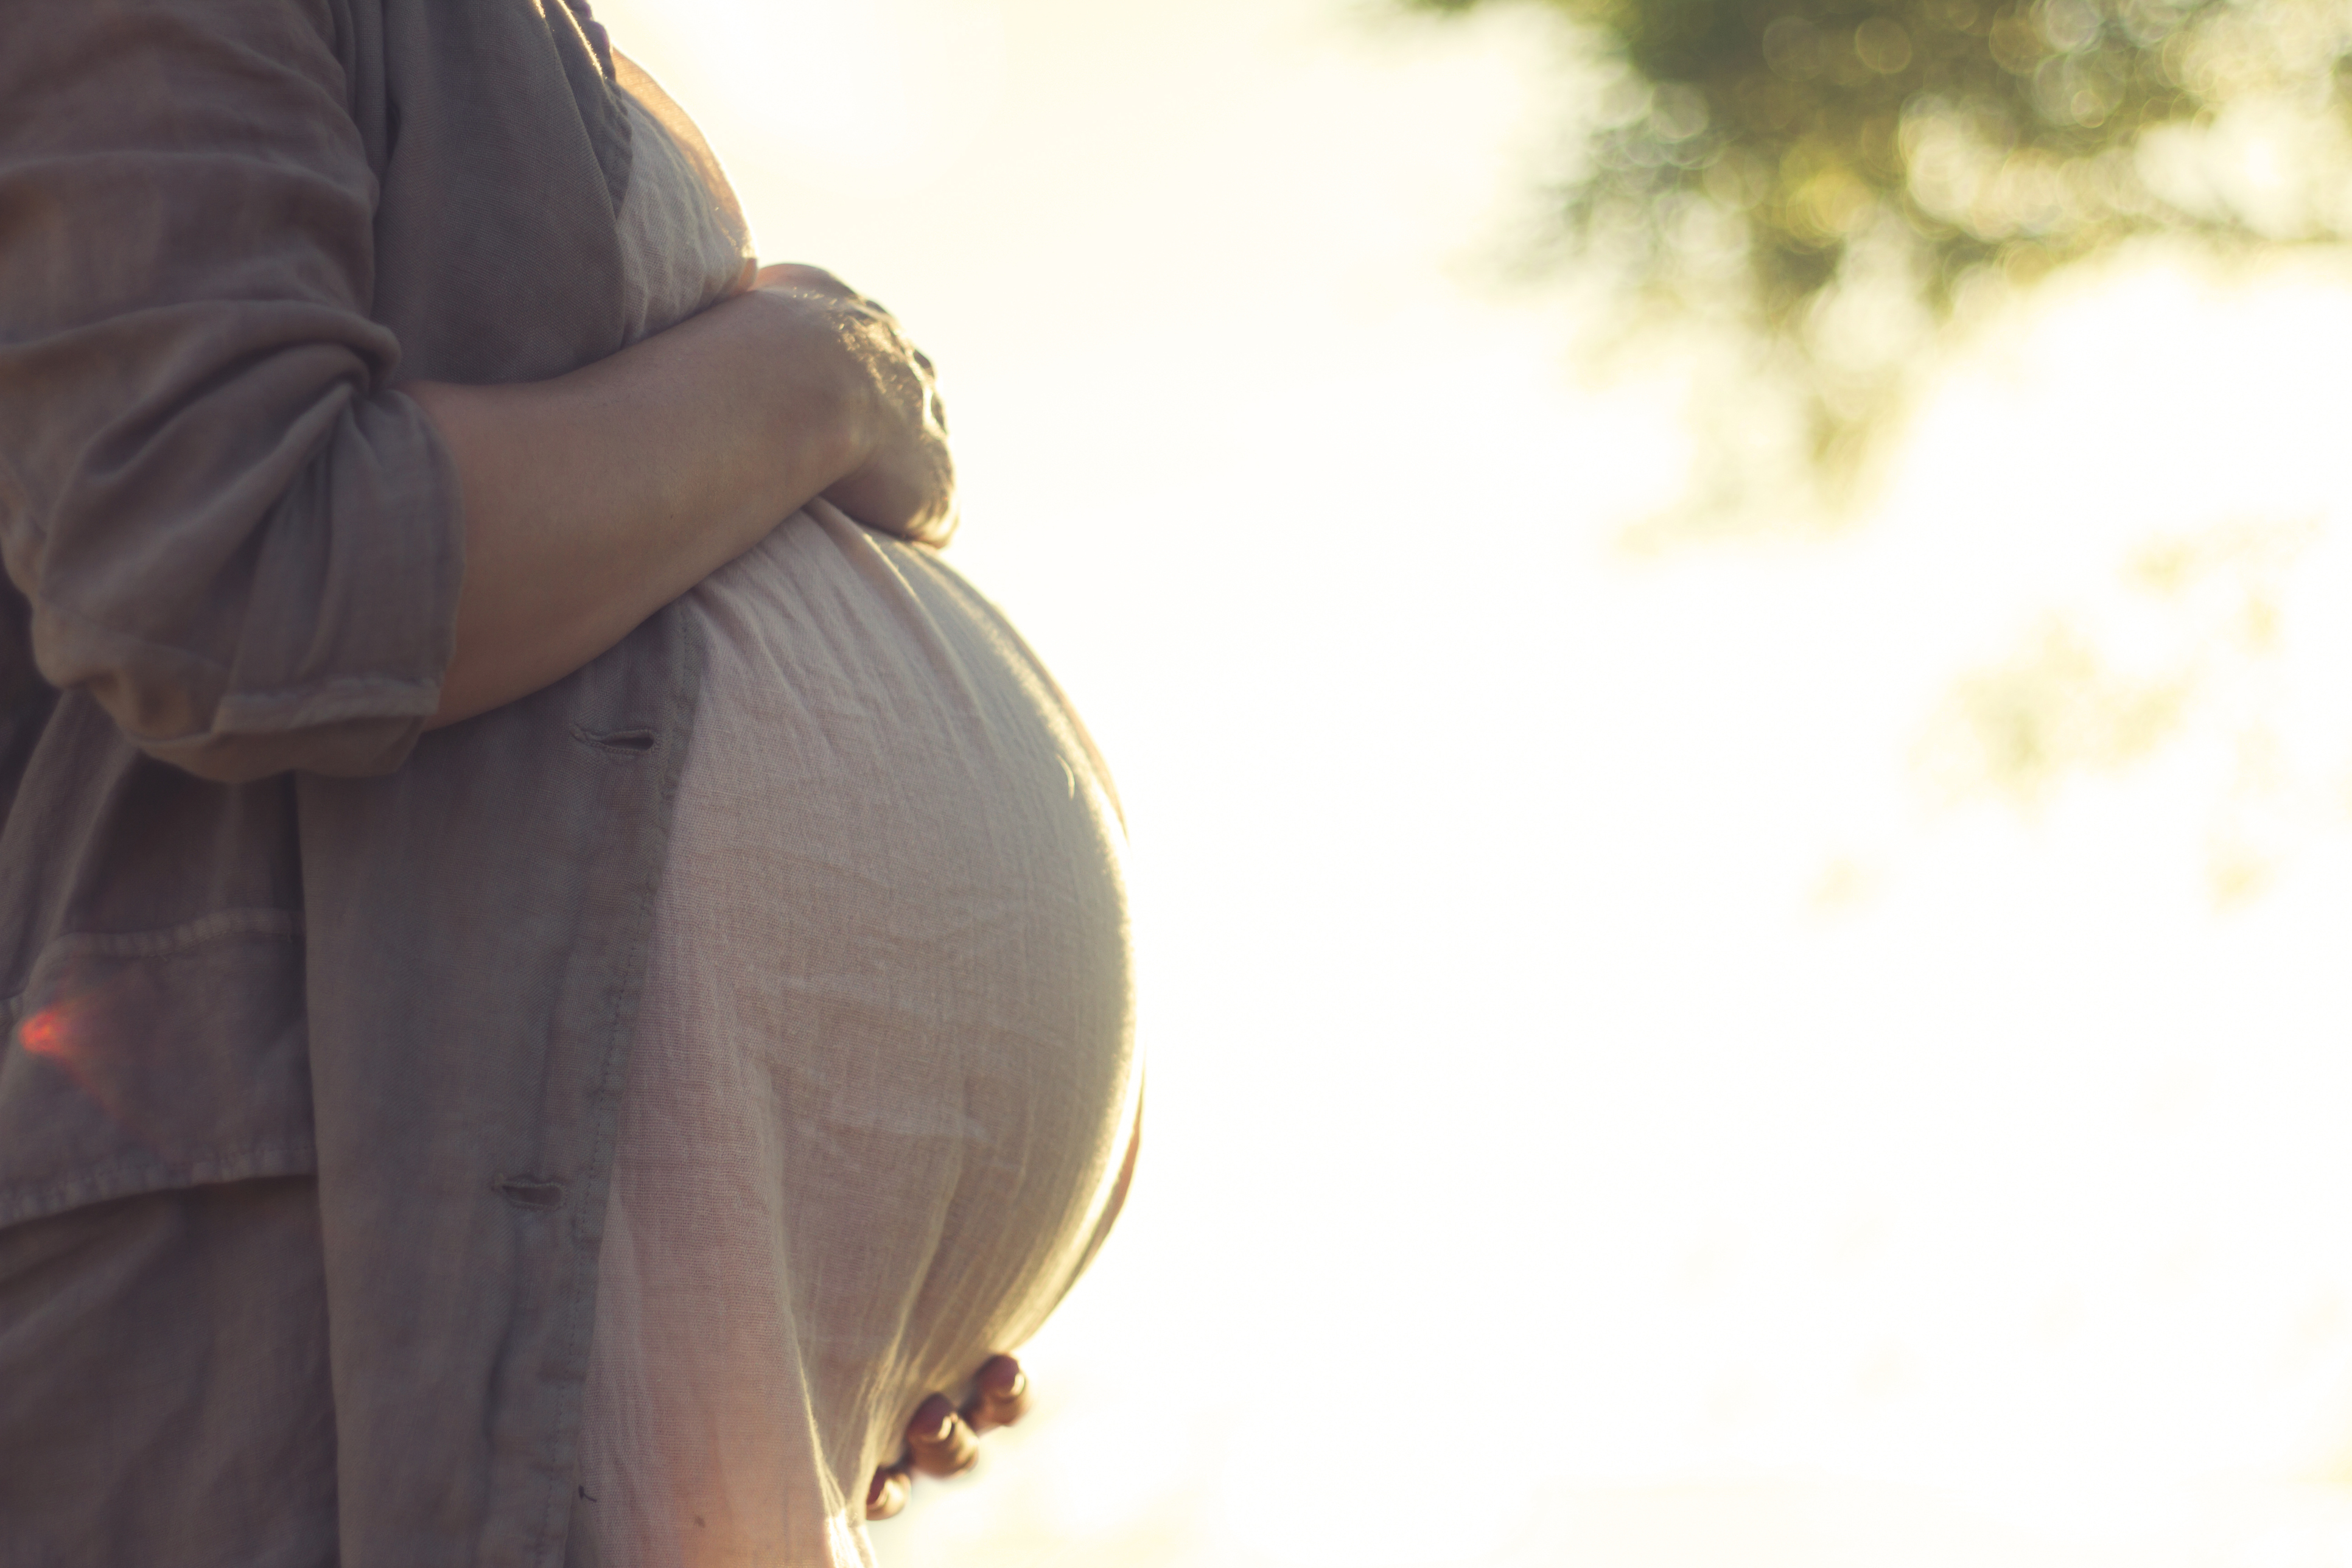 Pregnant Women Expect Better: Real-World Evidence Can Solve the Knowledge Gap